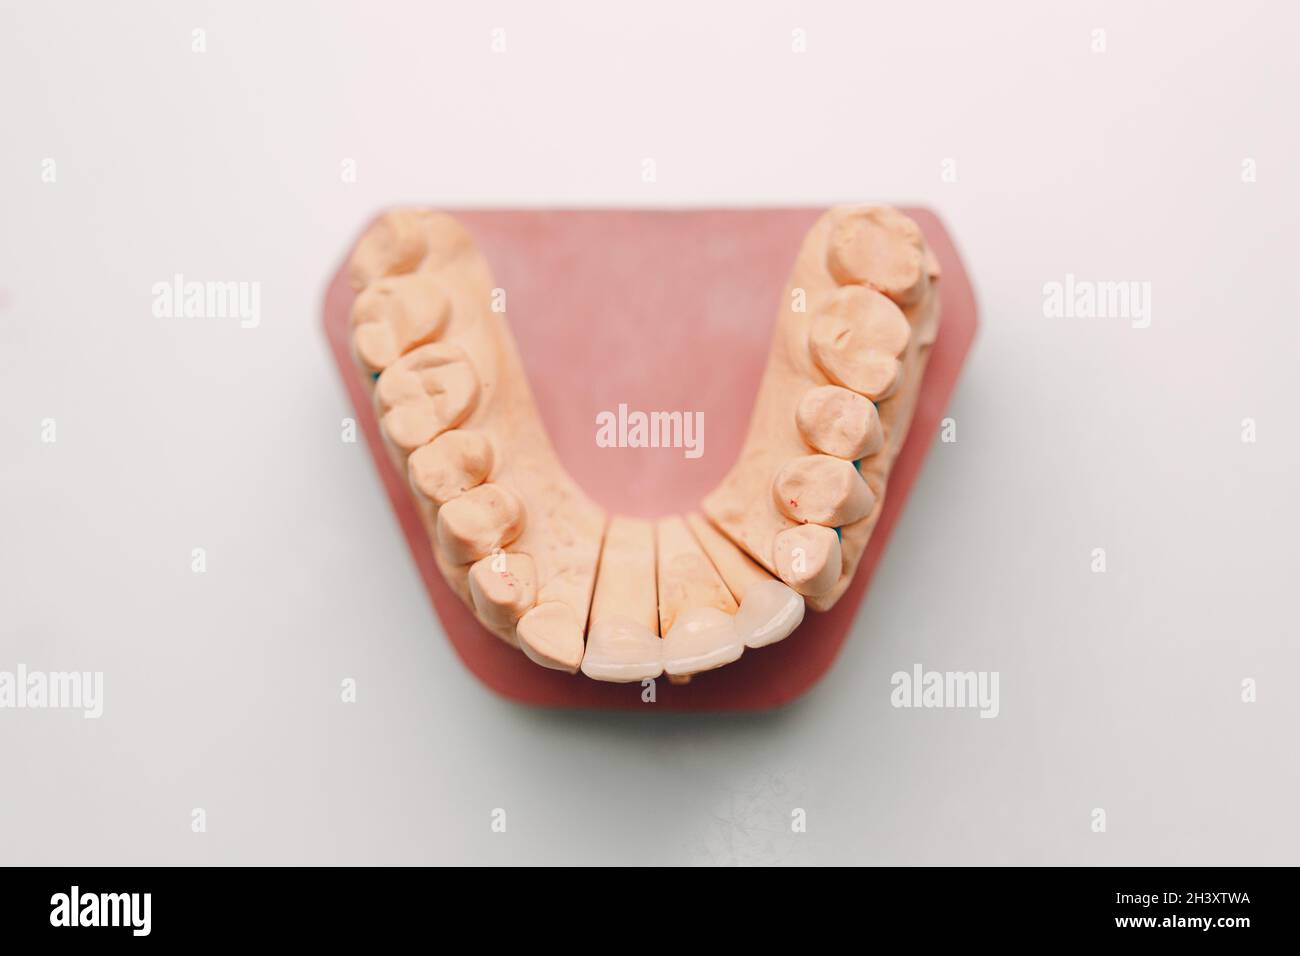 Dental layout of the human jaw with teeth and implants. Stock Photo